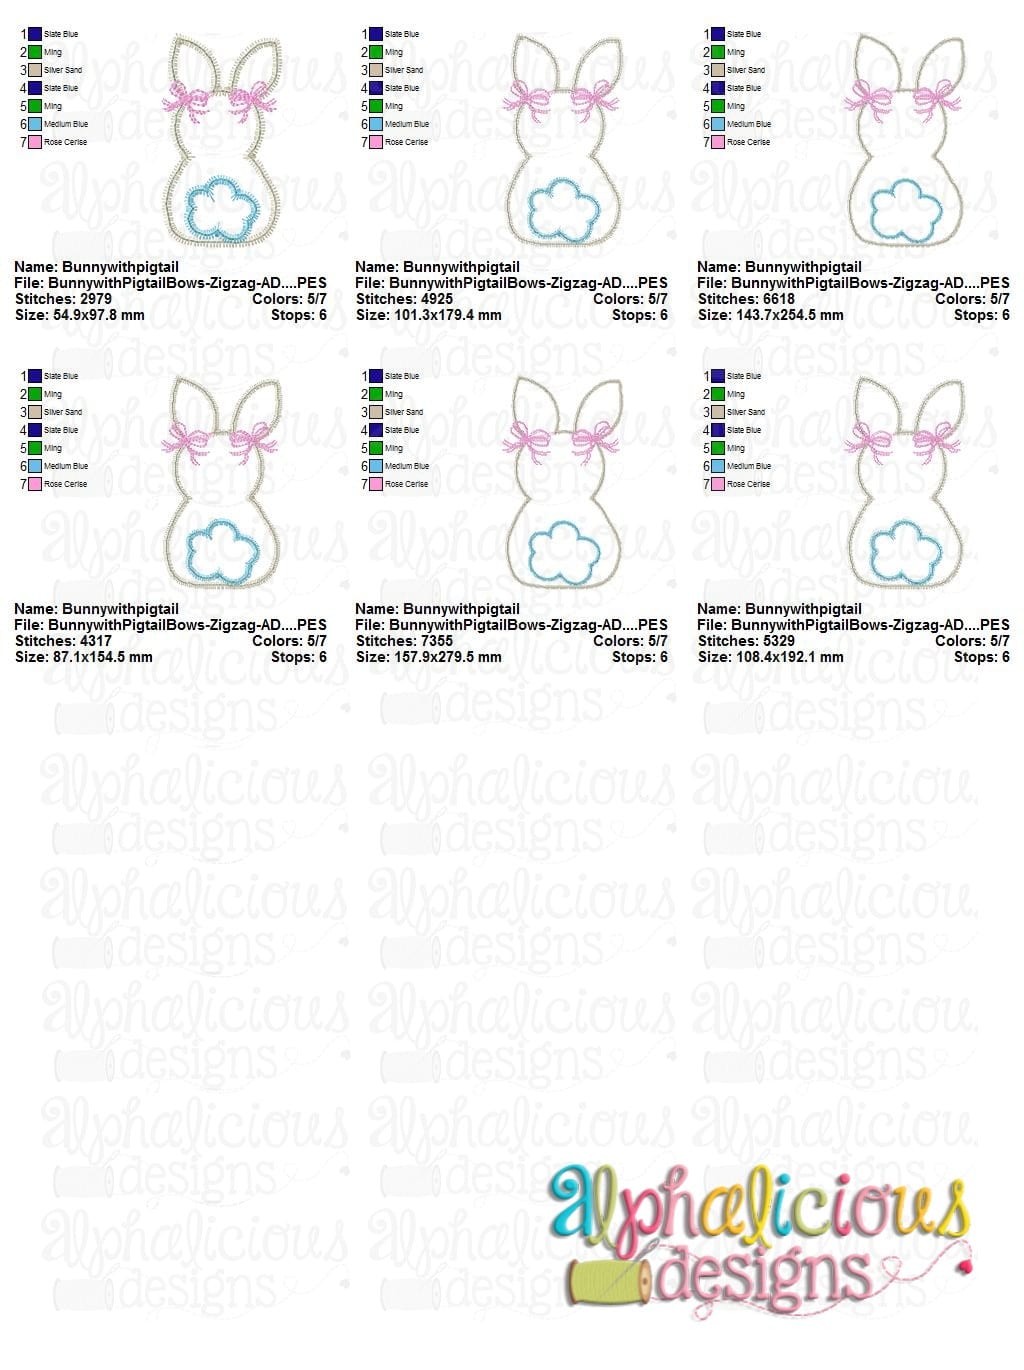 Bunny with Pigtail Bows - Zig zag